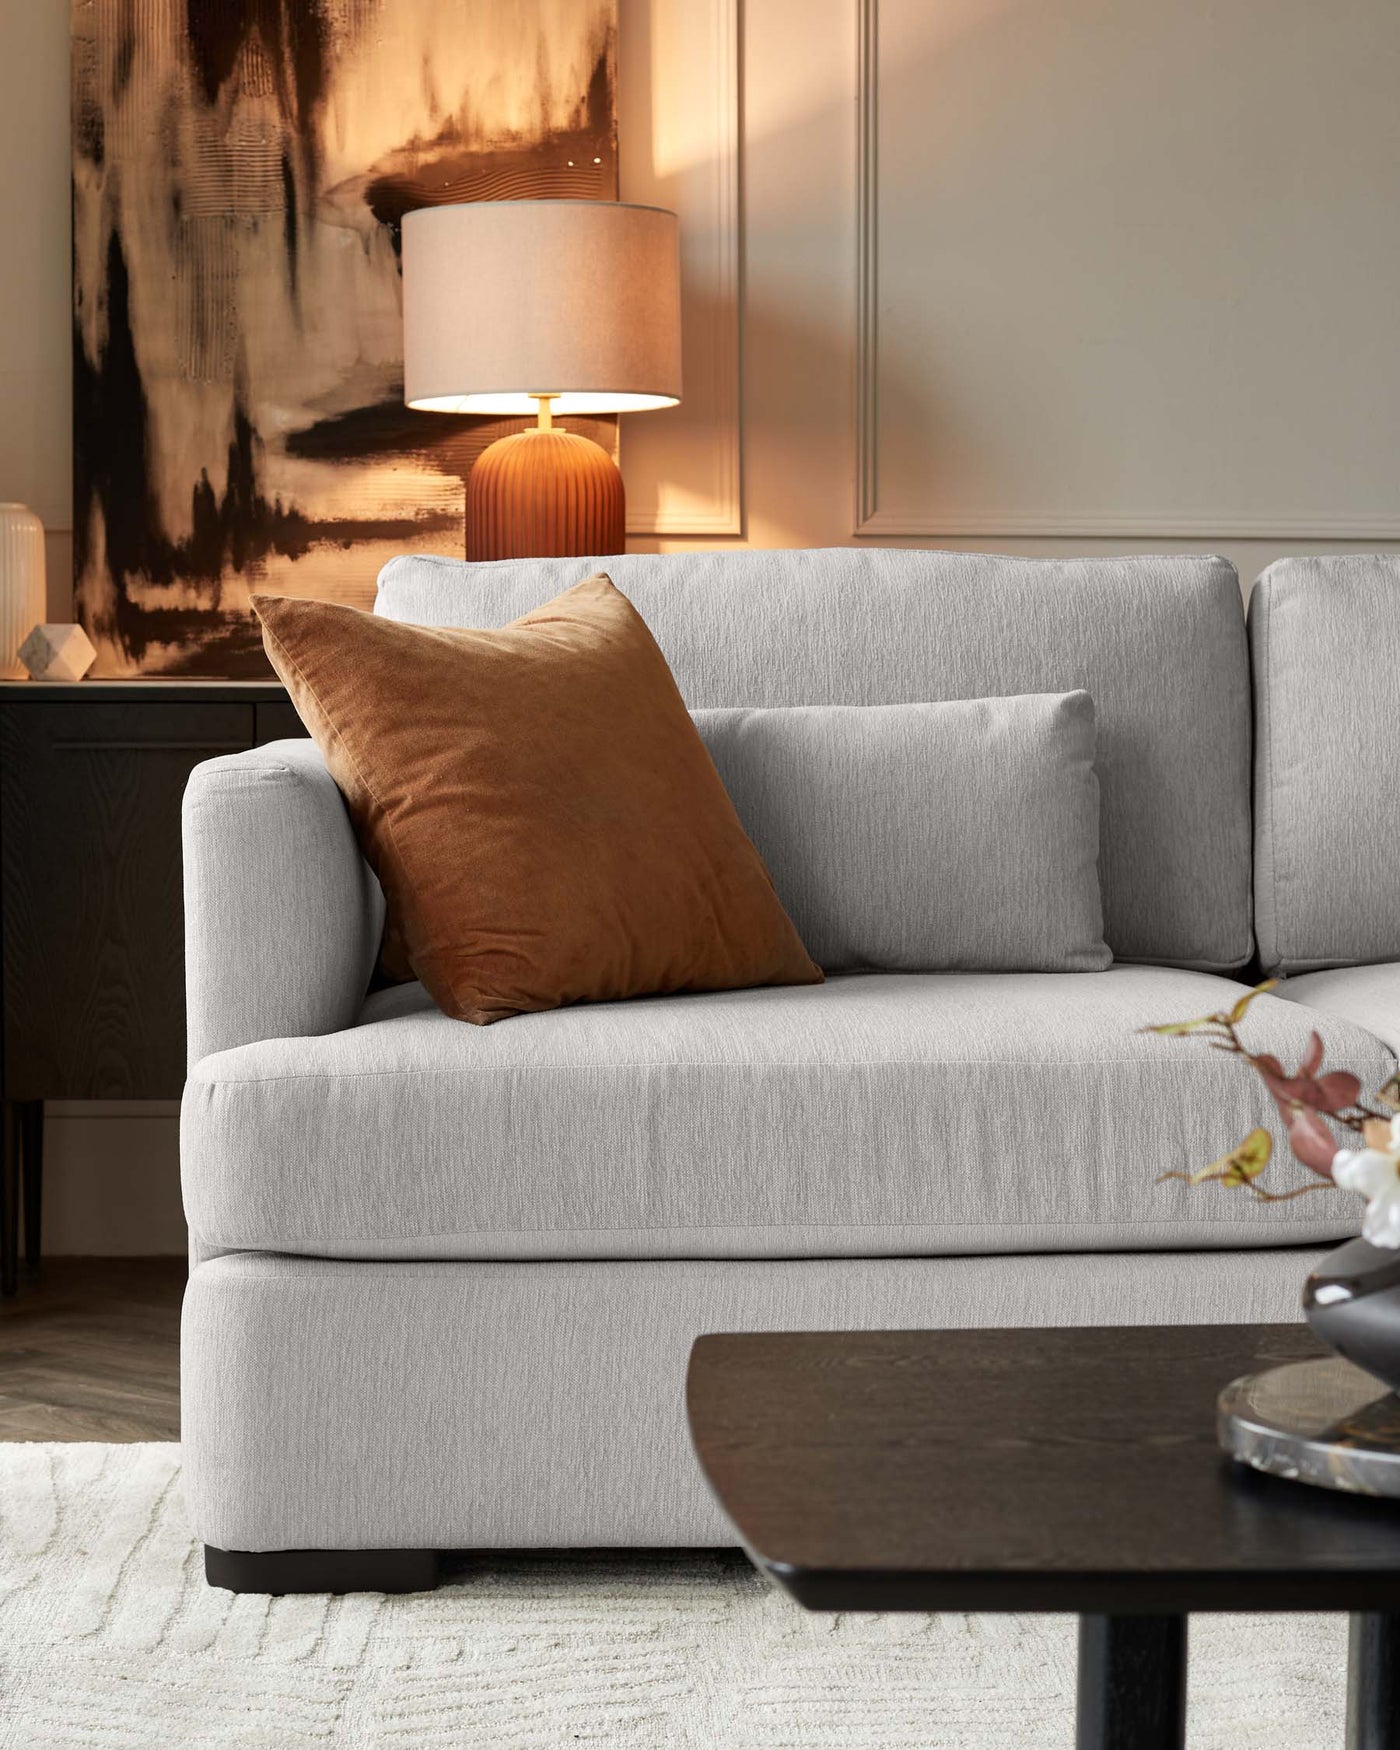 Modern living room featuring a light grey fabric sofa with plush cushions and a single burnt orange throw pillow. Adjacent to the sofa is a dark wood side table holding a cream-colored lamp with a unique ribbed base and a cylindrical shade. In the foreground, a black wooden coffee table with an oval shape adds a stark contrast. The scene is set on a textured off-white area rug, adding warmth to the space.